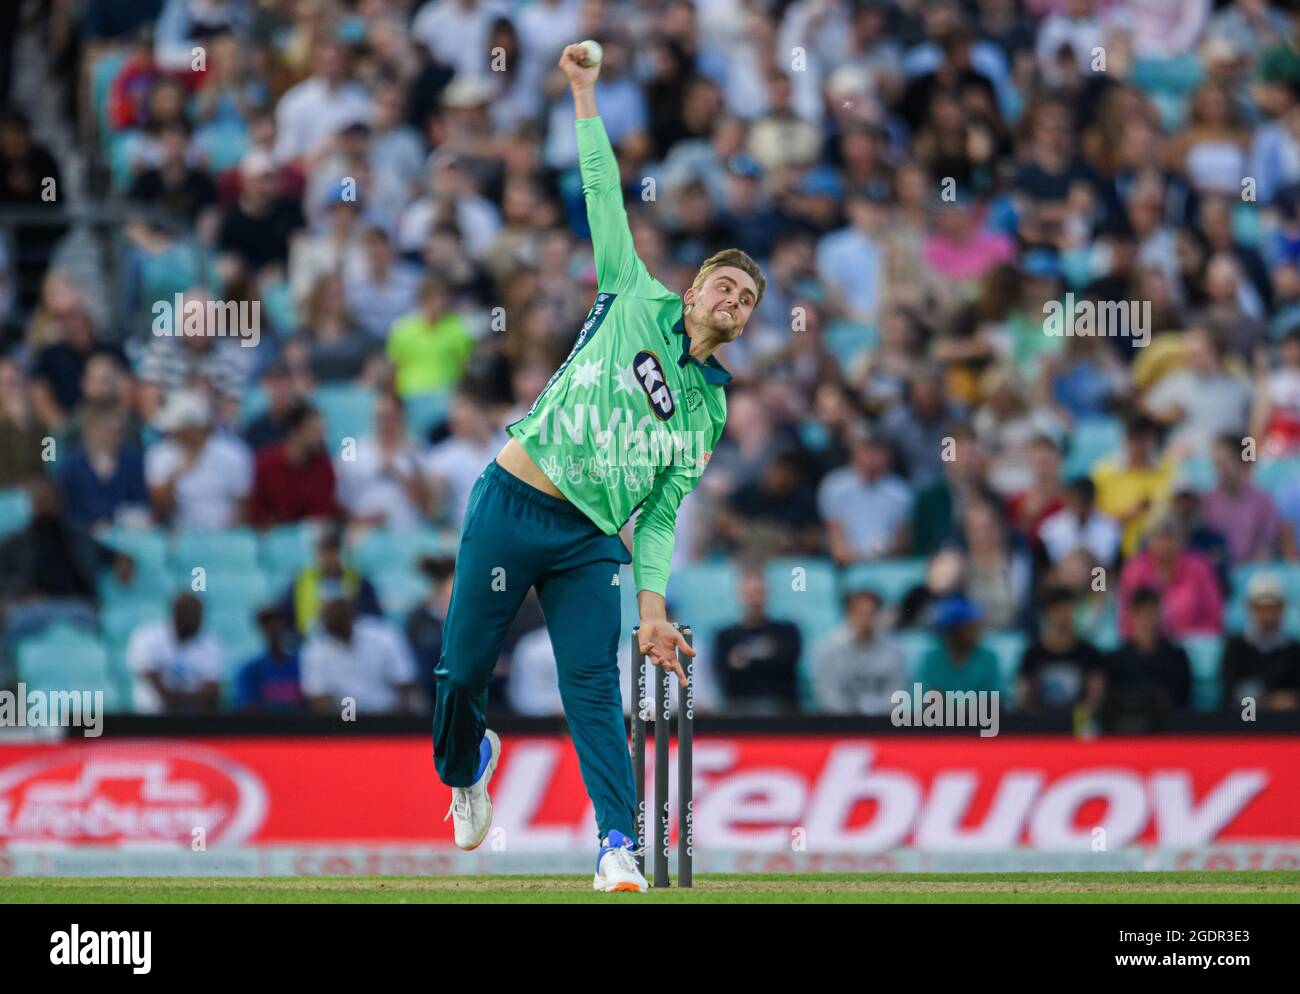 LONDON, UNITED KINGDOM. 14th Aug, 2021. Will Jacks of Oval Invincibles during The Hundred between Oval Invincibles vs London Spirit at The Oval Cricket Ground on Saturday, August 14, 2021 in LONDON ENGLAND.  Credit: Taka G Wu/Alamy Live News Stock Photo